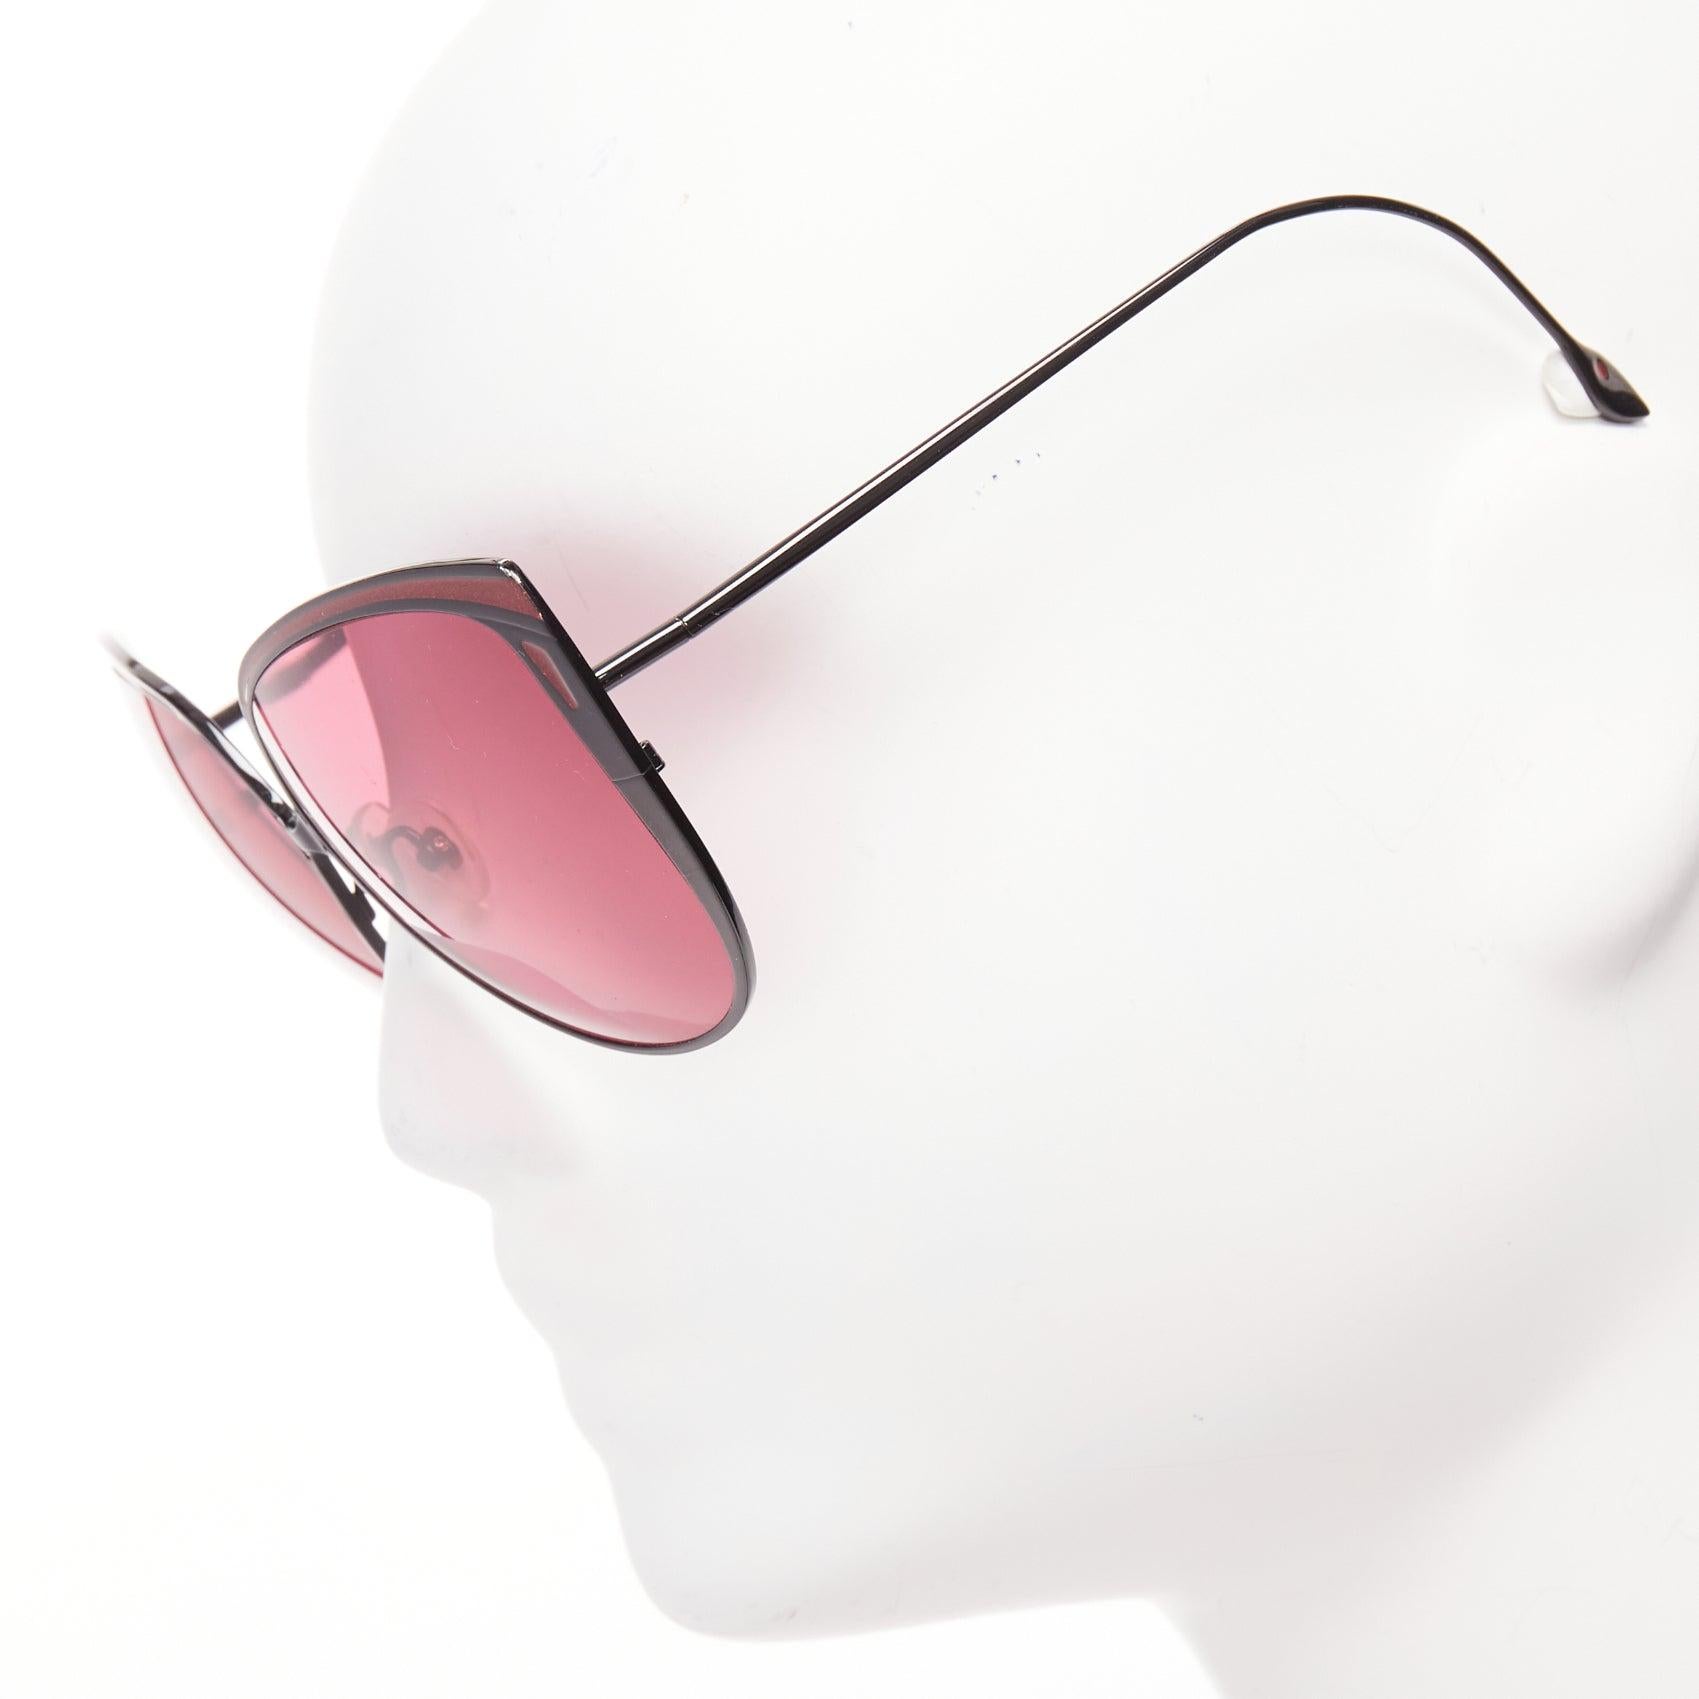 FRENCY AND MERCURY Fox Beat pink lens red glitter oversize sunglasses
Reference: AAWC/A01018
Brand: Frency and Mercury
Model: Fox Beat
Material: Metal
Color: Pink, Black
Pattern: Solid
Lining: Black Metal
Extra Details: Metallic trim at